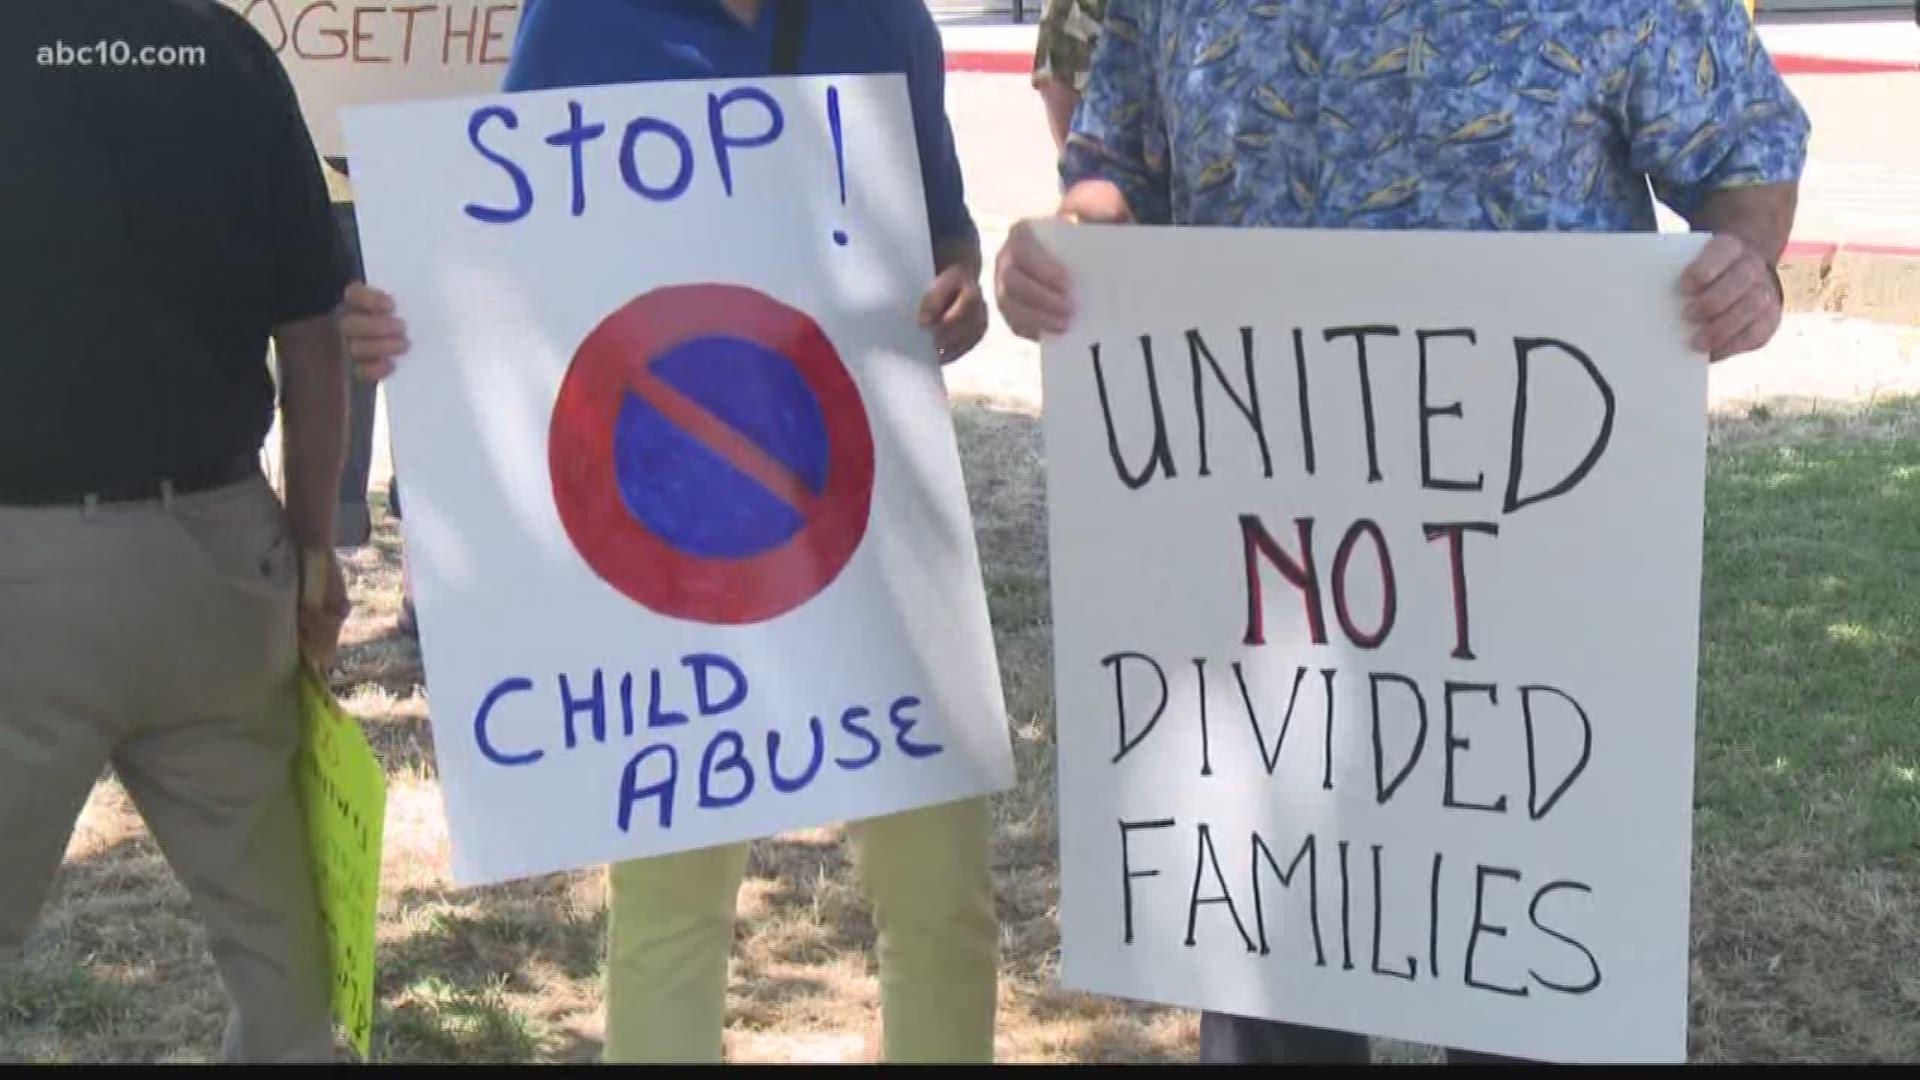 Several residents of Heritage Park in Sacramento spent Tuesday afternoon protesting the Trump administration's child separation border policy.